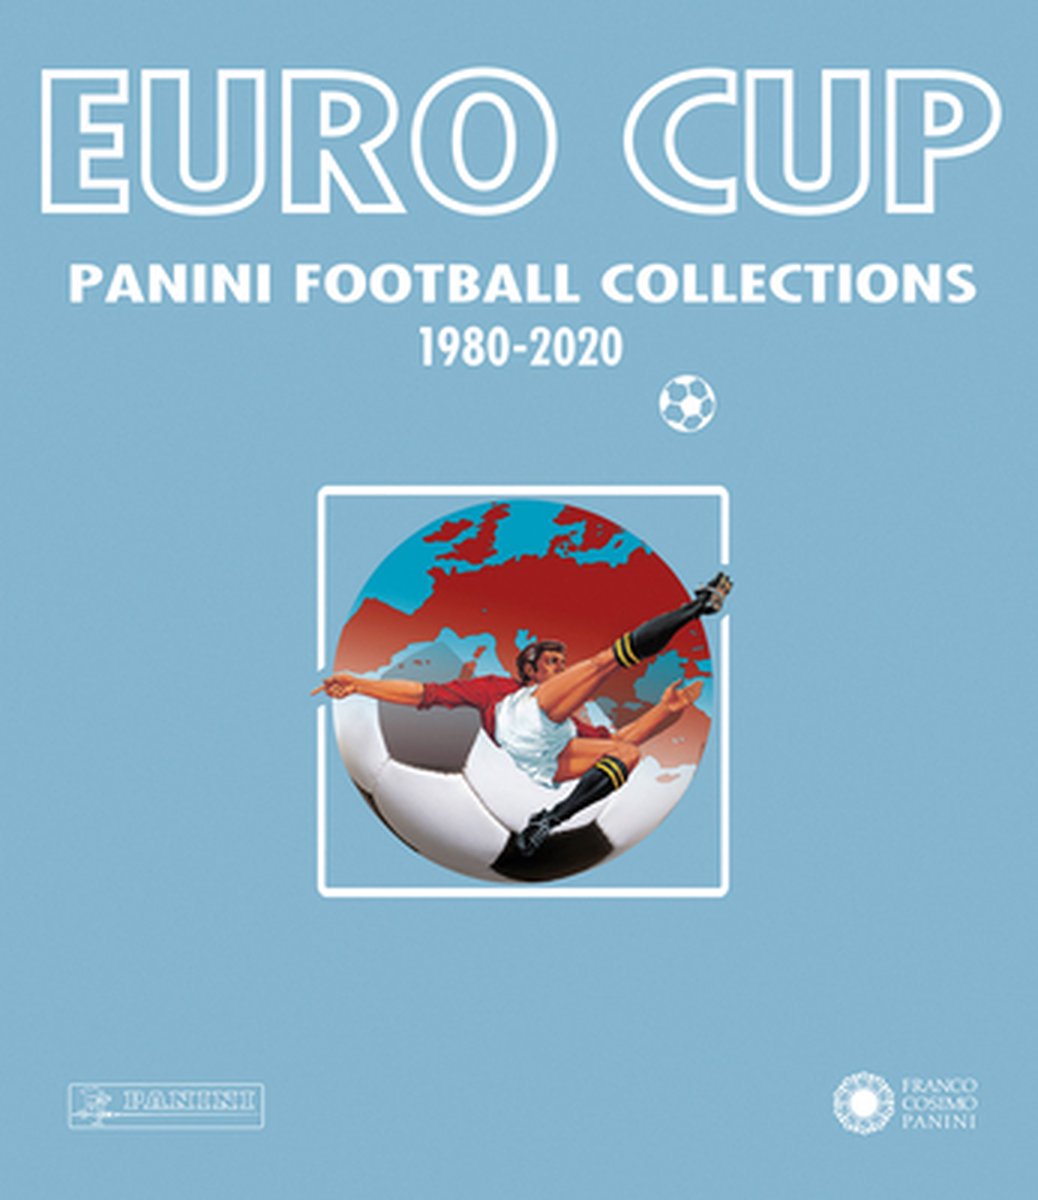 Cup euro Euro Cup